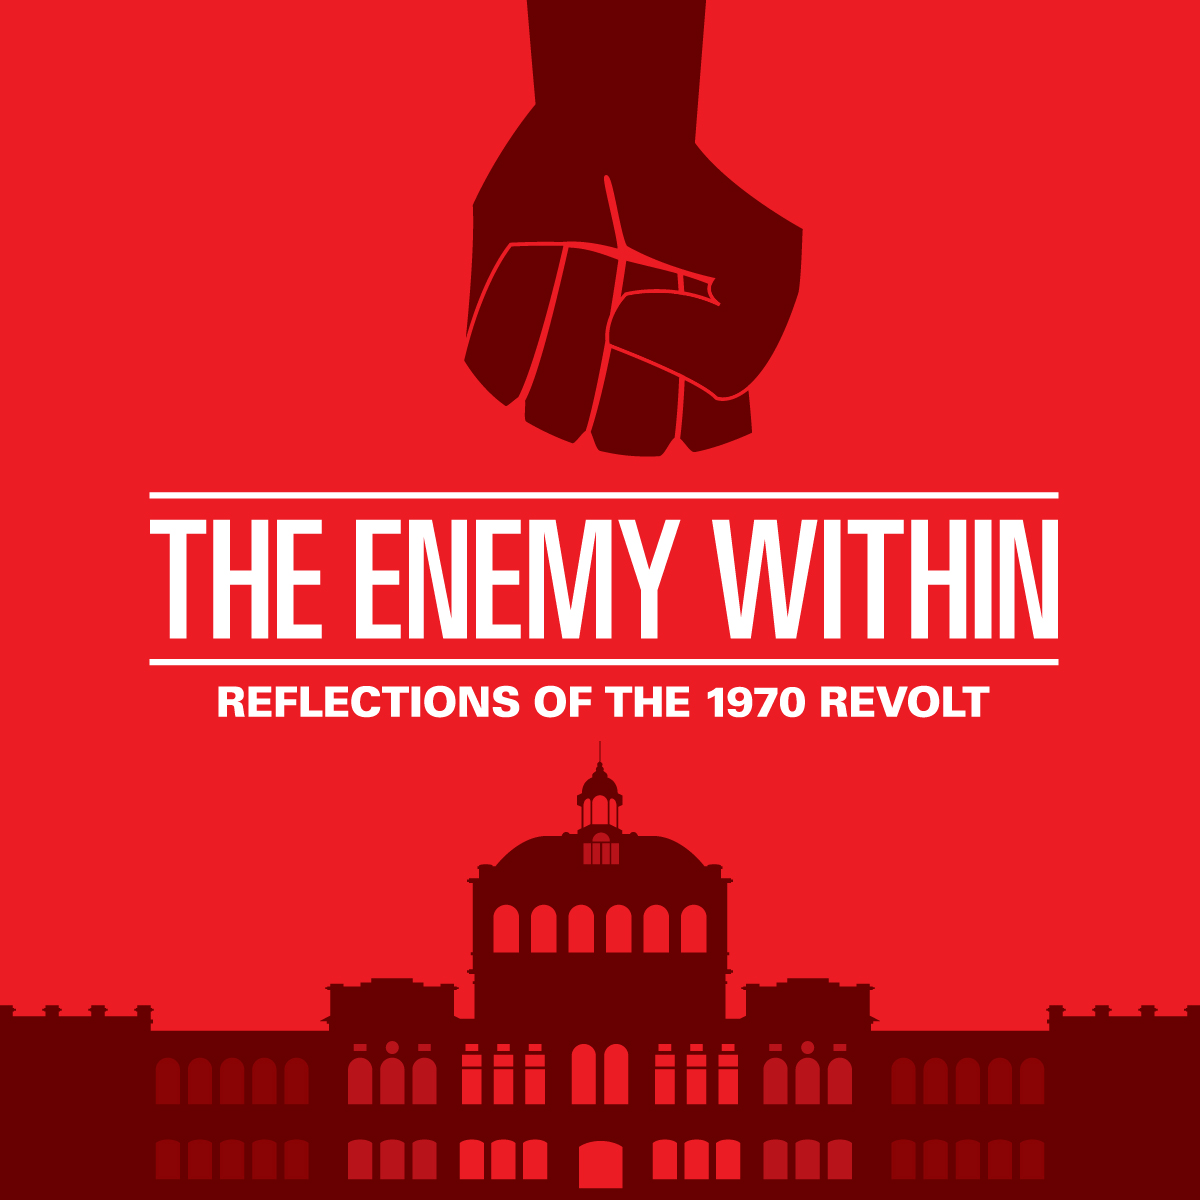 The Enemy Within Exhibition